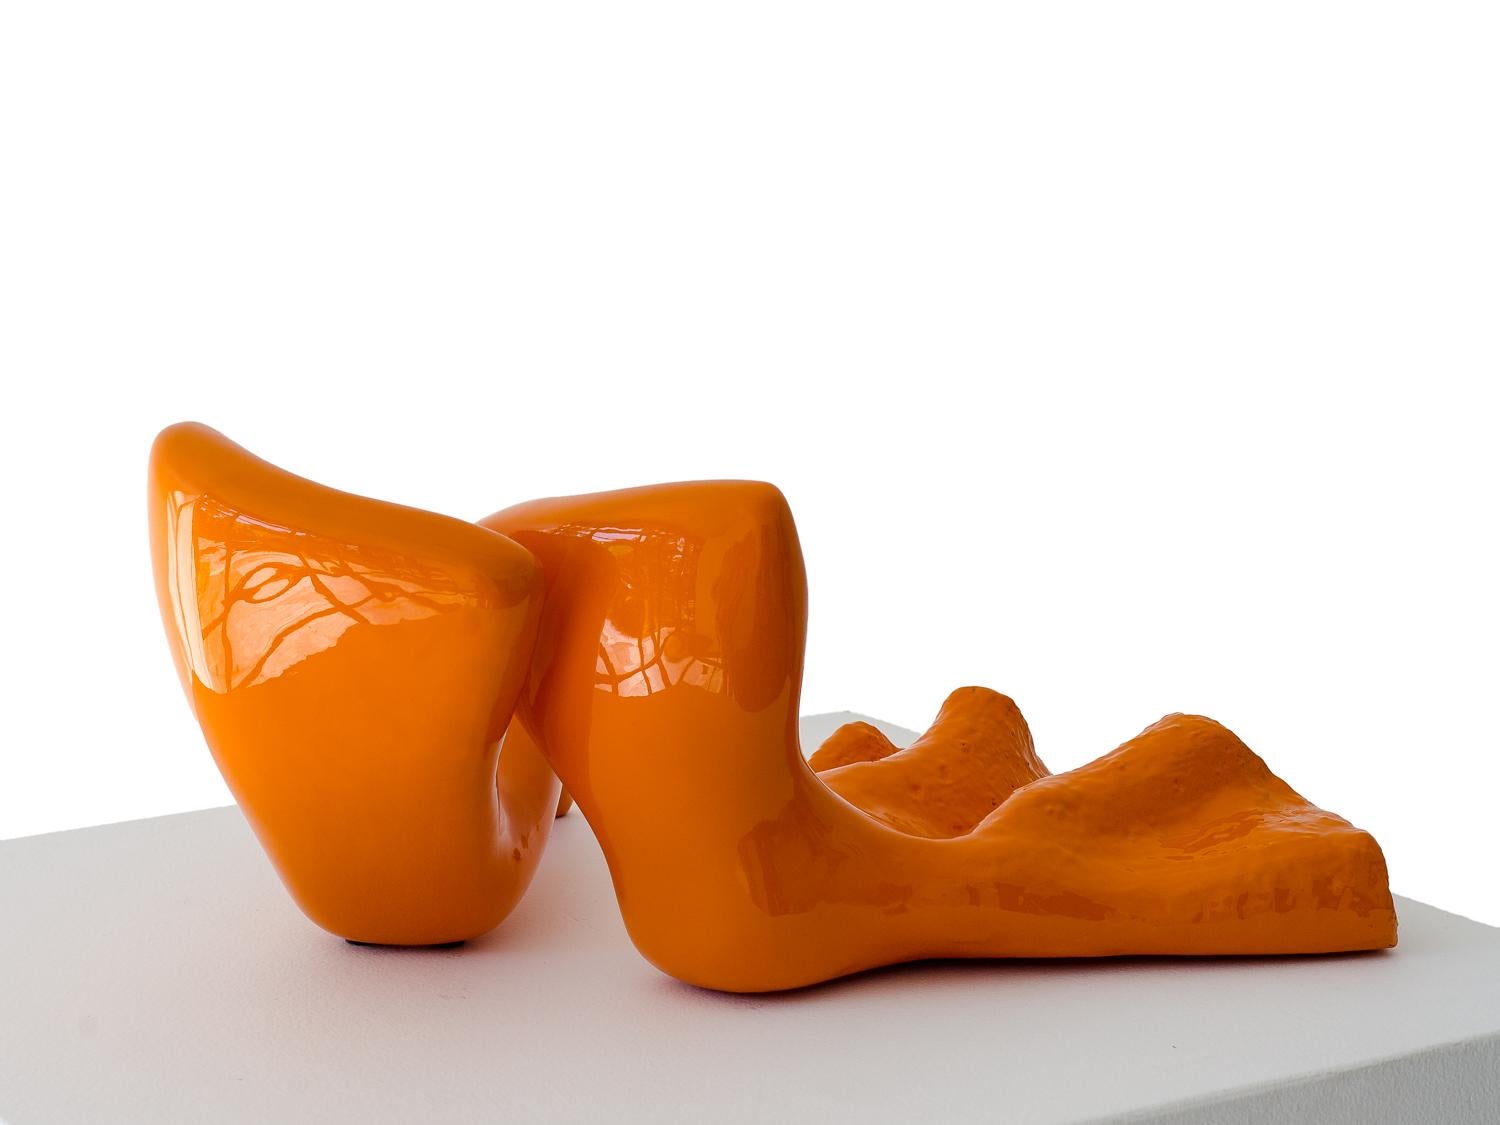 Couple in Orange. The couple fell in love; then they lost their heads! - Gold Figurative Sculpture by Beatriz Gerenstein